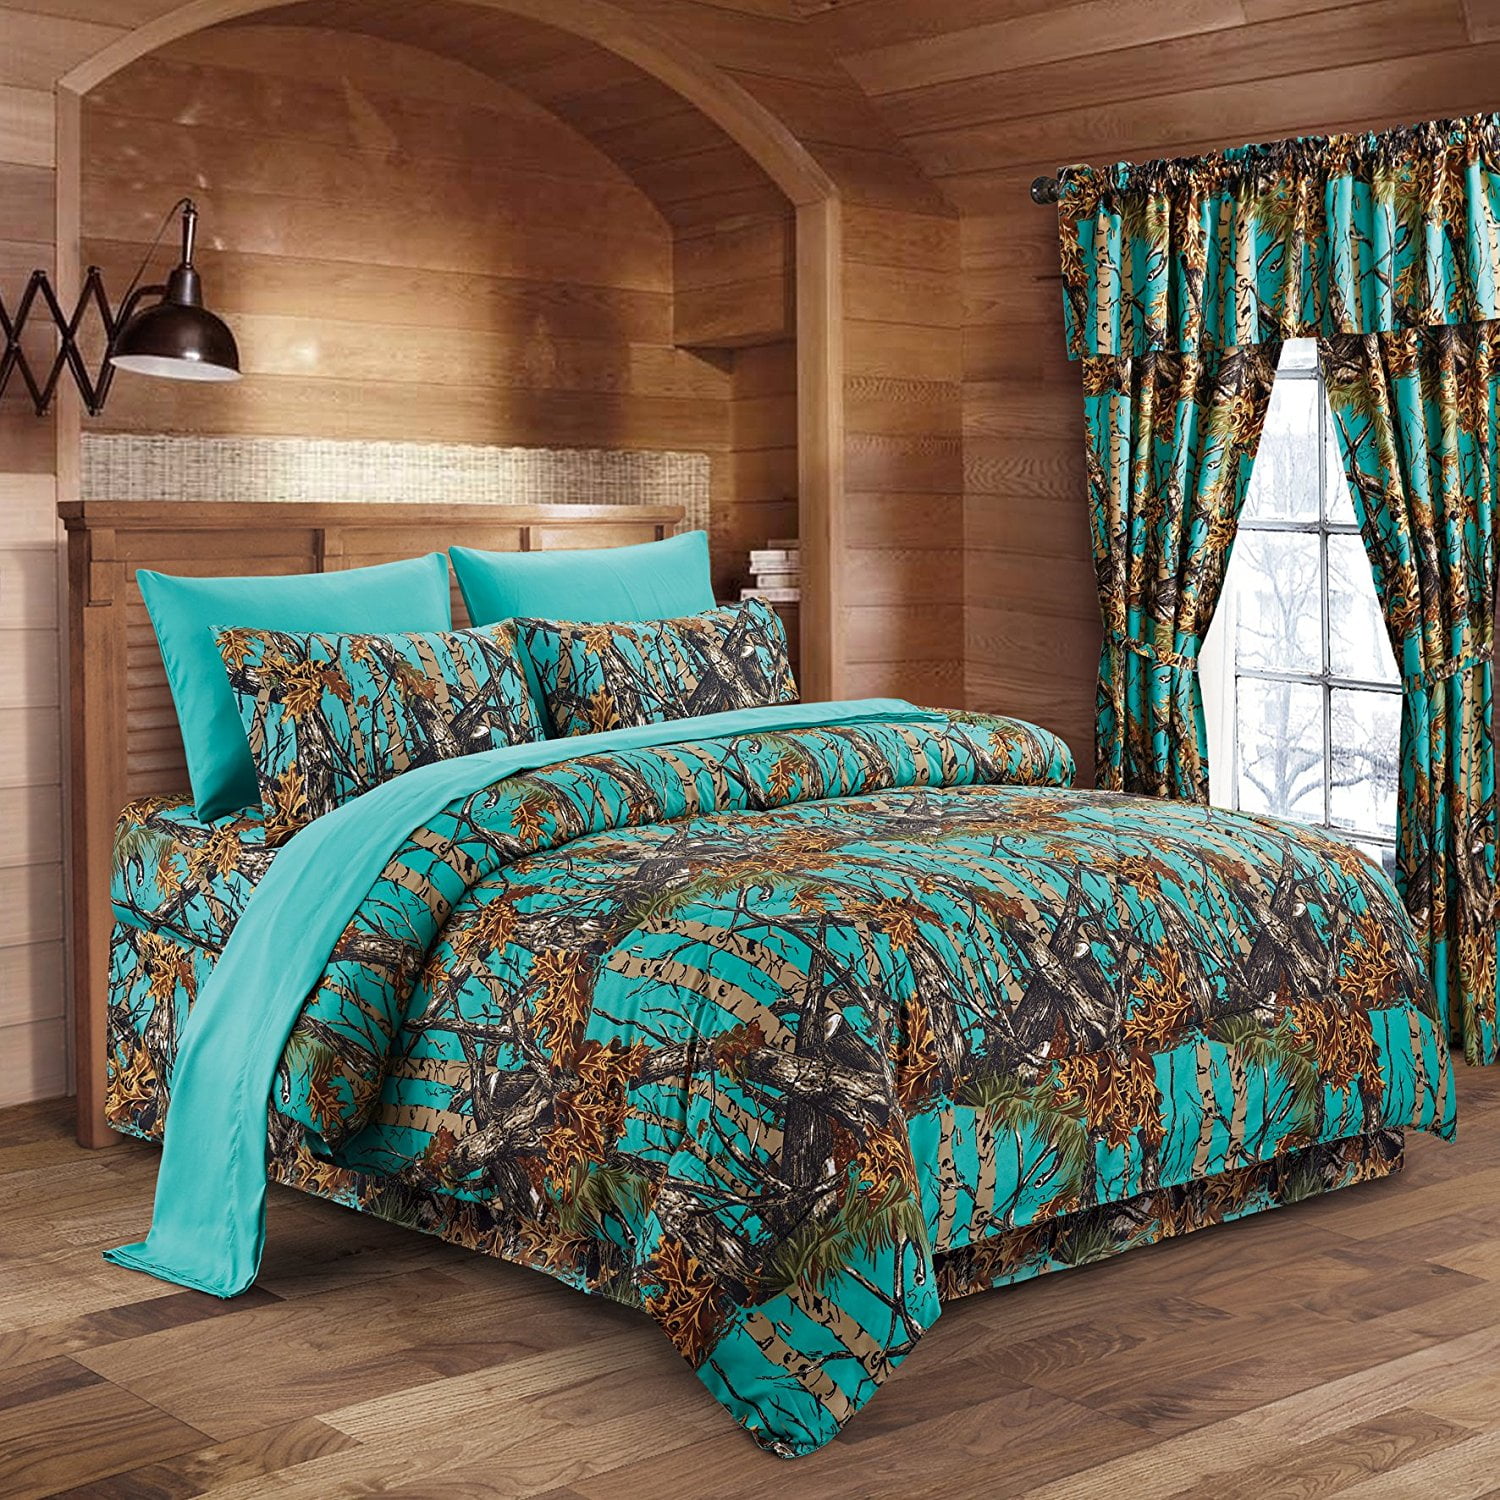 Bed Skirt Set By Camo Bedding, Camo King Bed Set